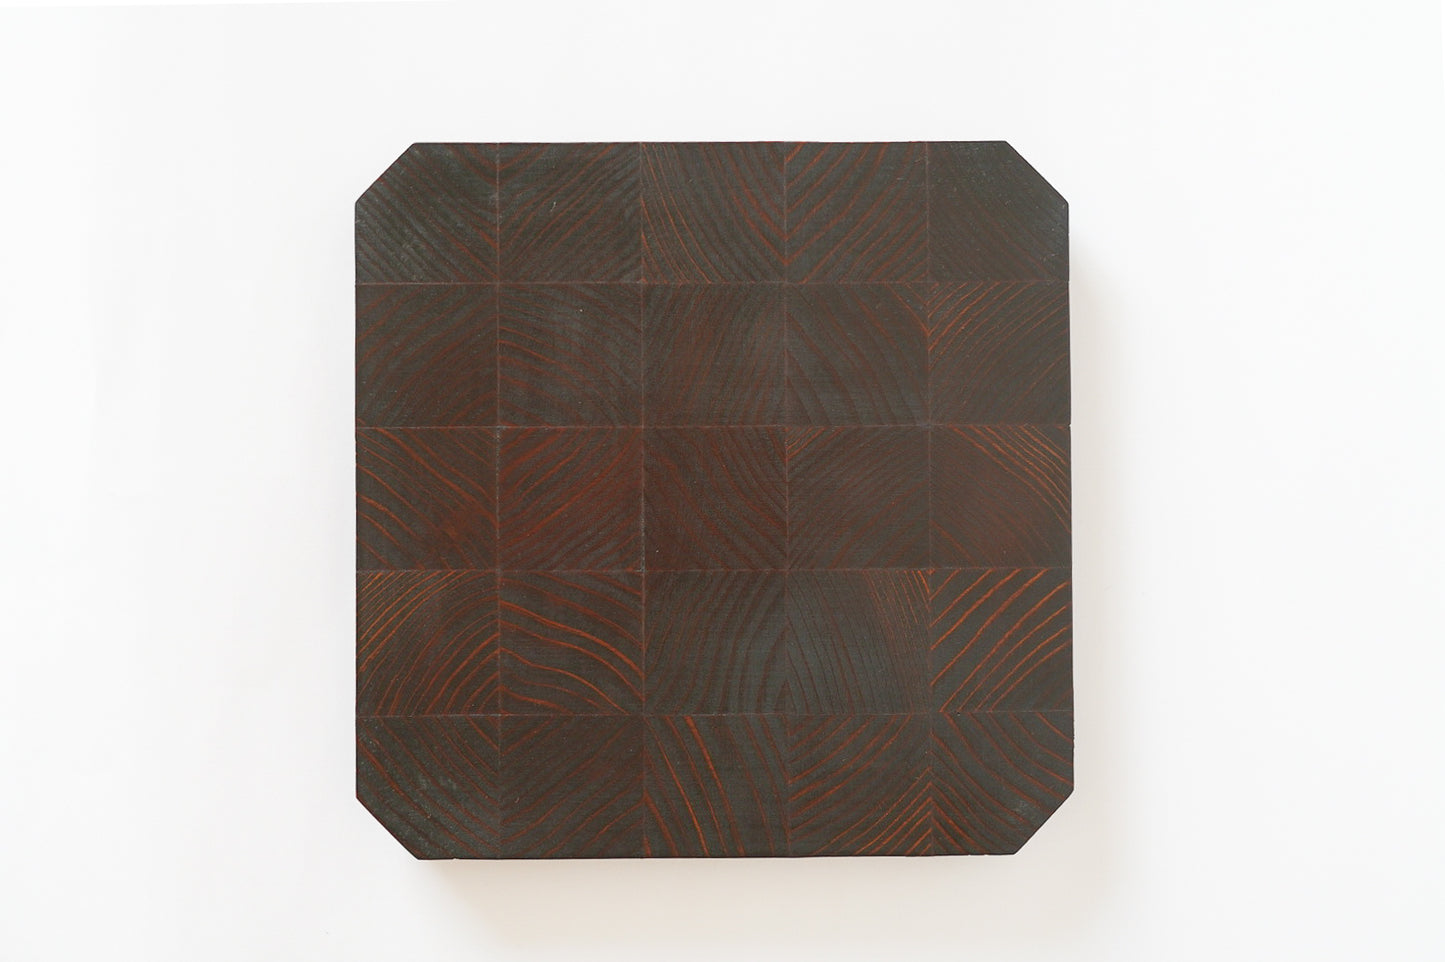 "Easy-to-use shape, design with a strong presence" Flat plate 5 inch x 5 inch tin-colored cedar [Aya Morishita]